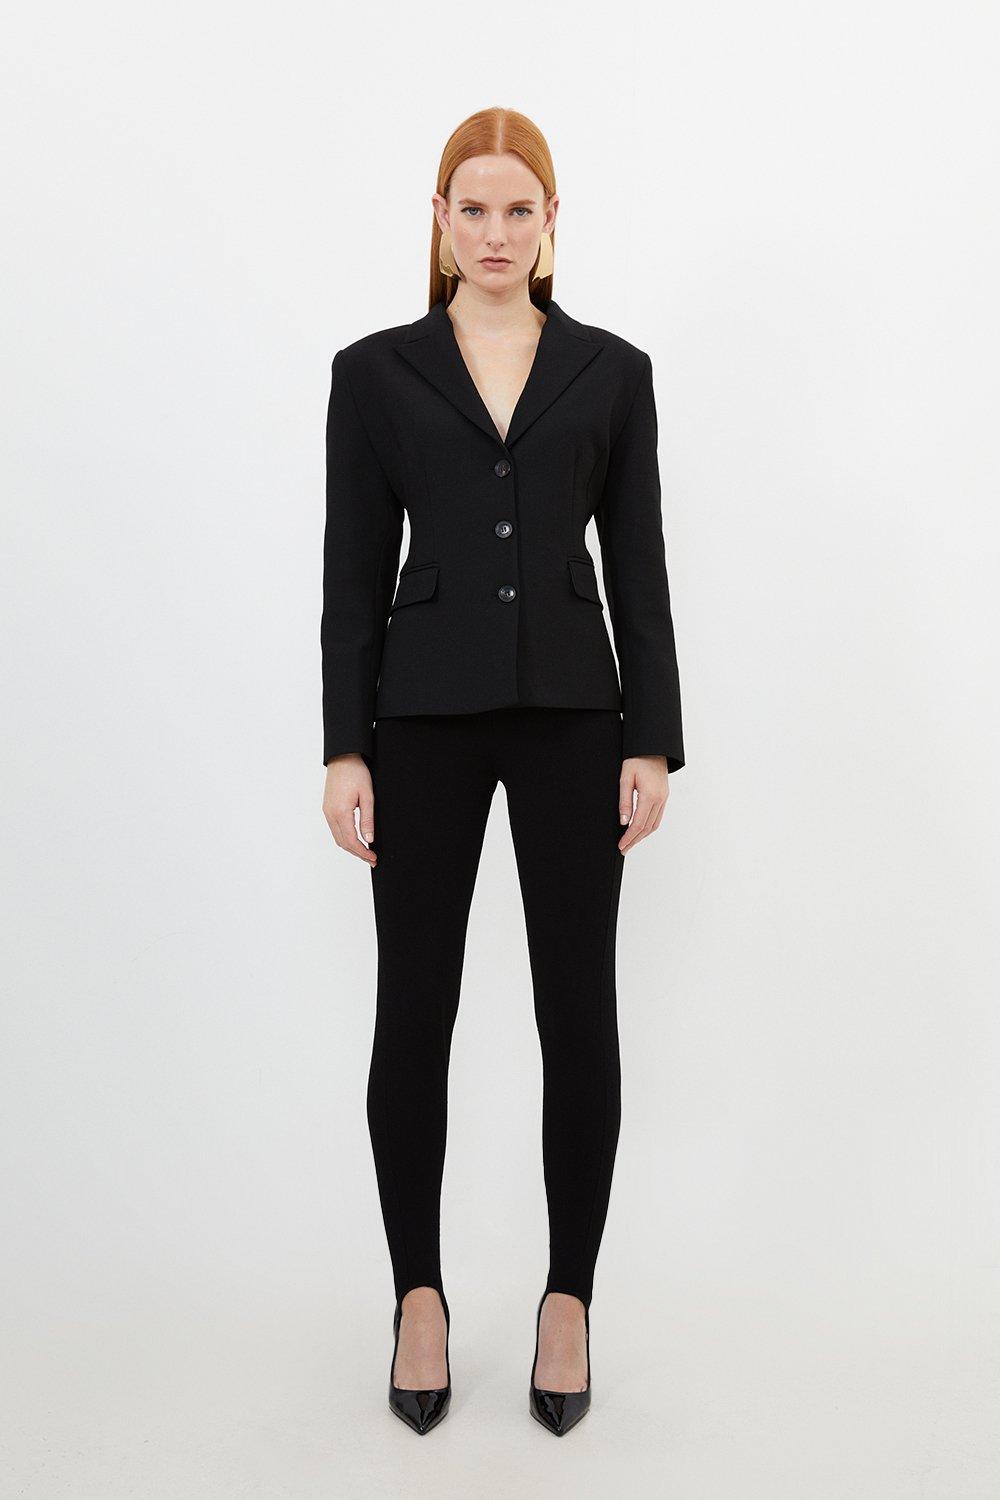 Sexy Black Cutaway Formal Pants For Women Suit For Women Perfect For  Evening Parties, Proms, Weddings And Formal Wear Jacket And Formal Pants  For Women Included From Foreverbridal, $82.77 | DHgate.Com